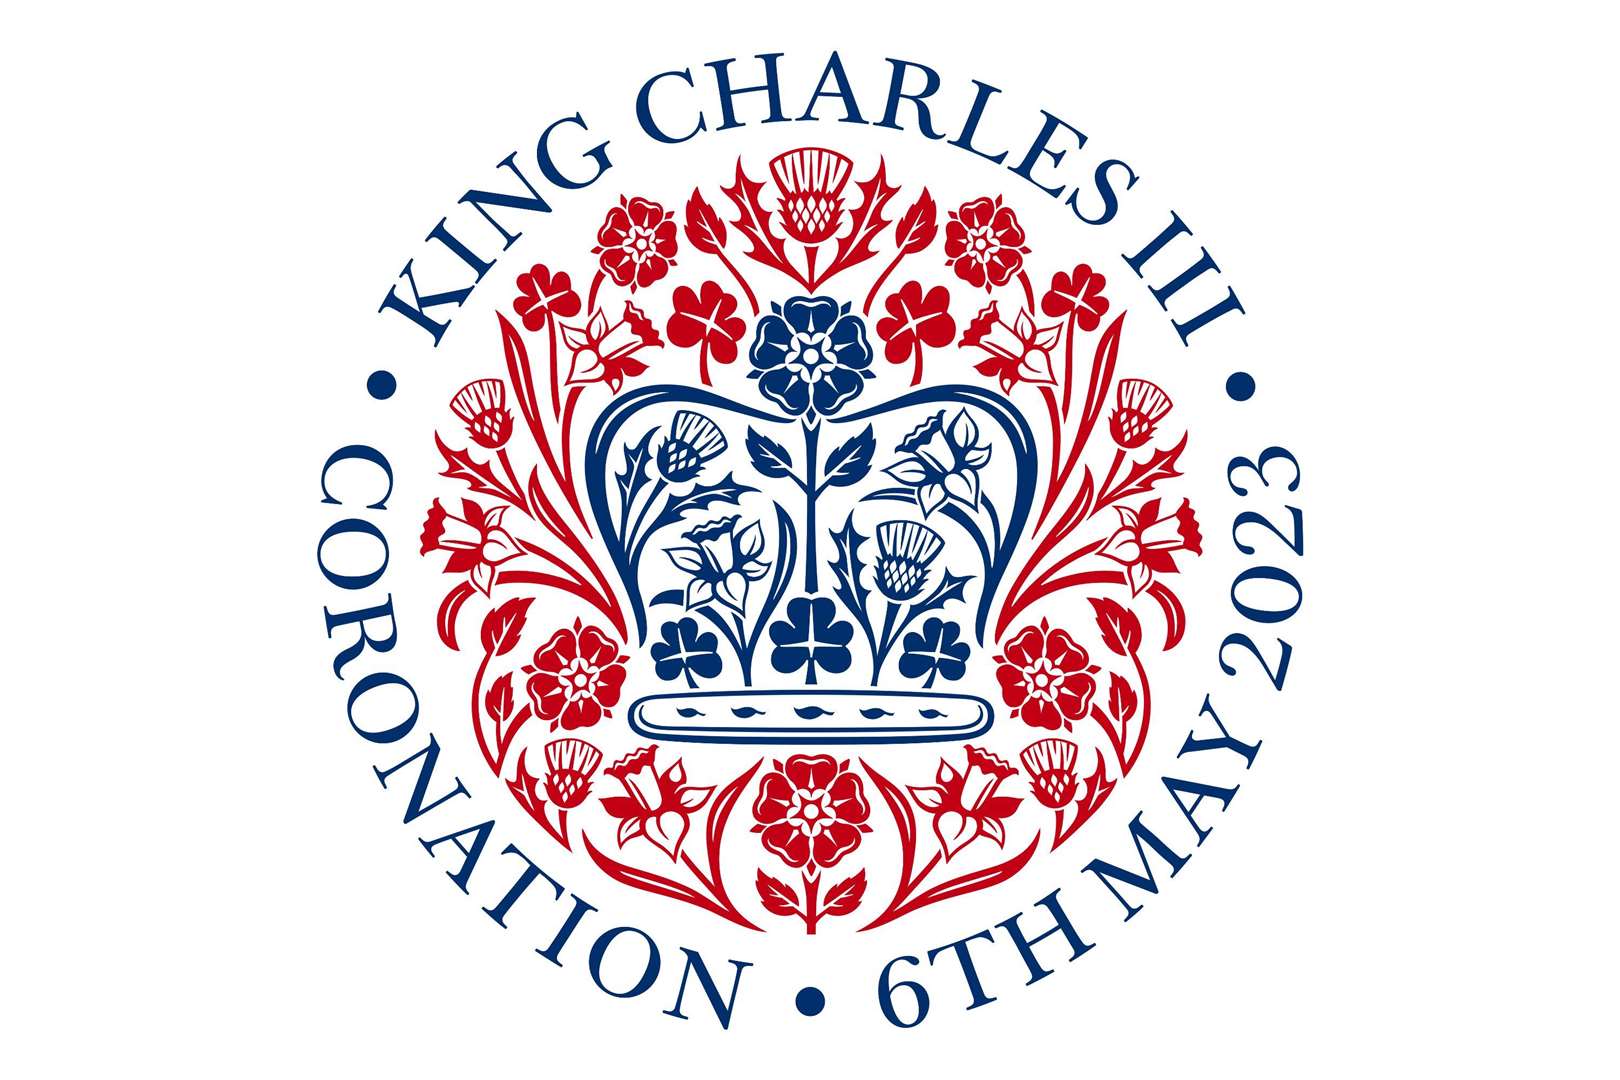 King Charles III coronation takes place on May 6